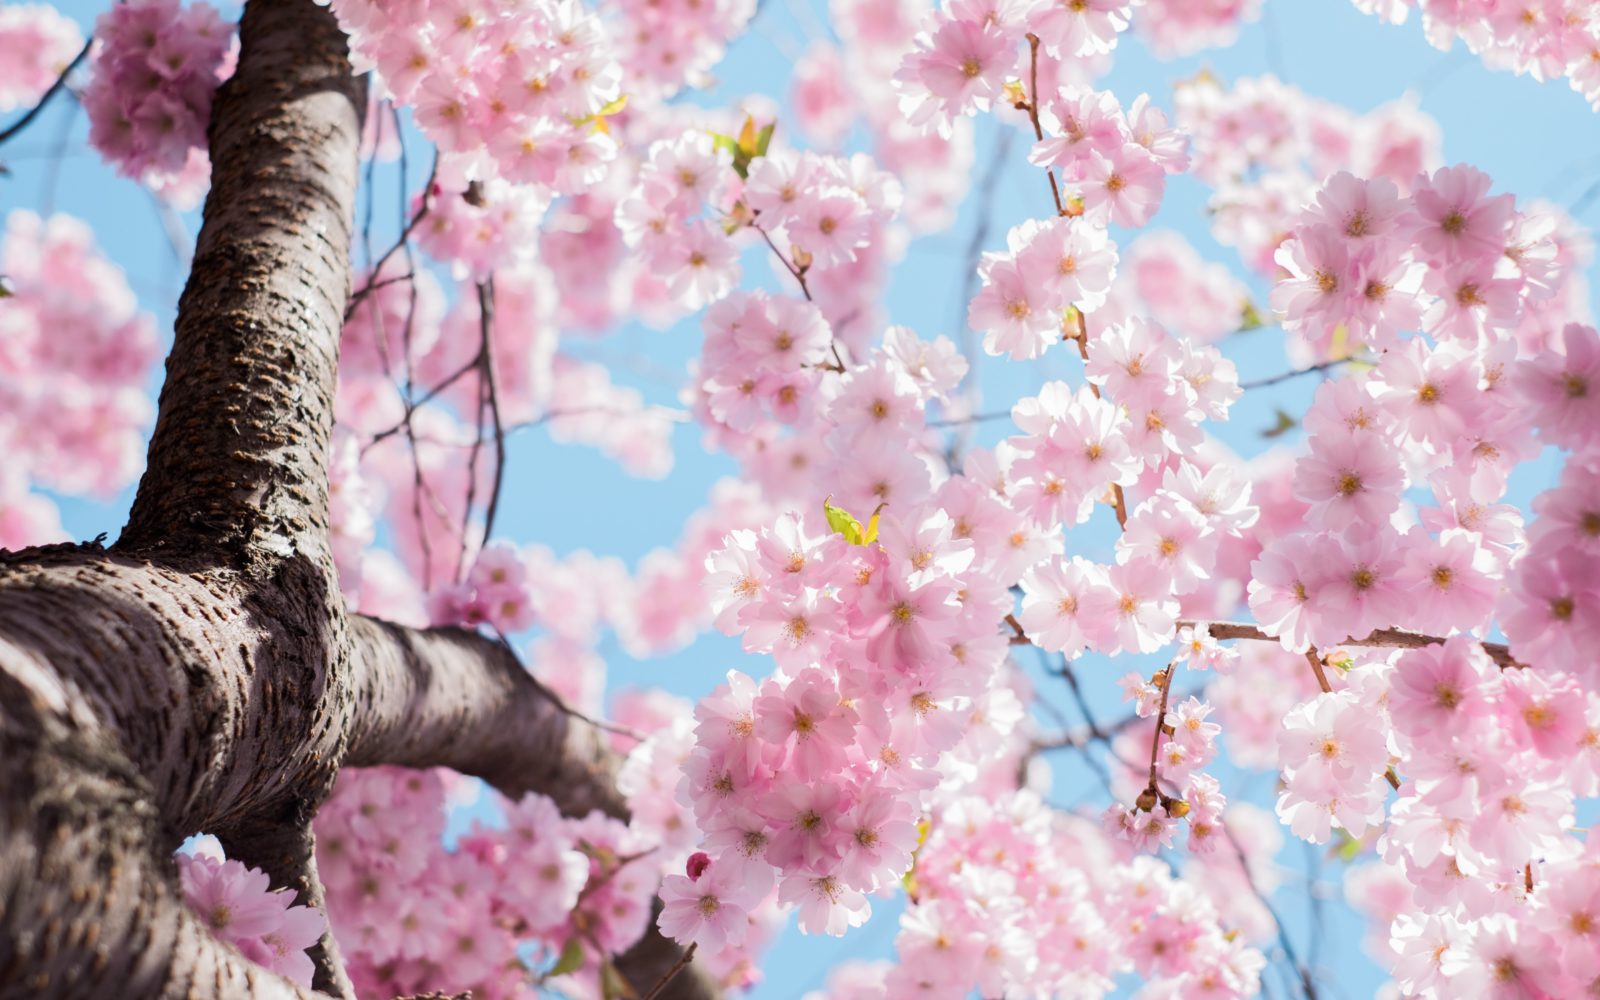 Spring is time for detox, as well as cherry blossoms